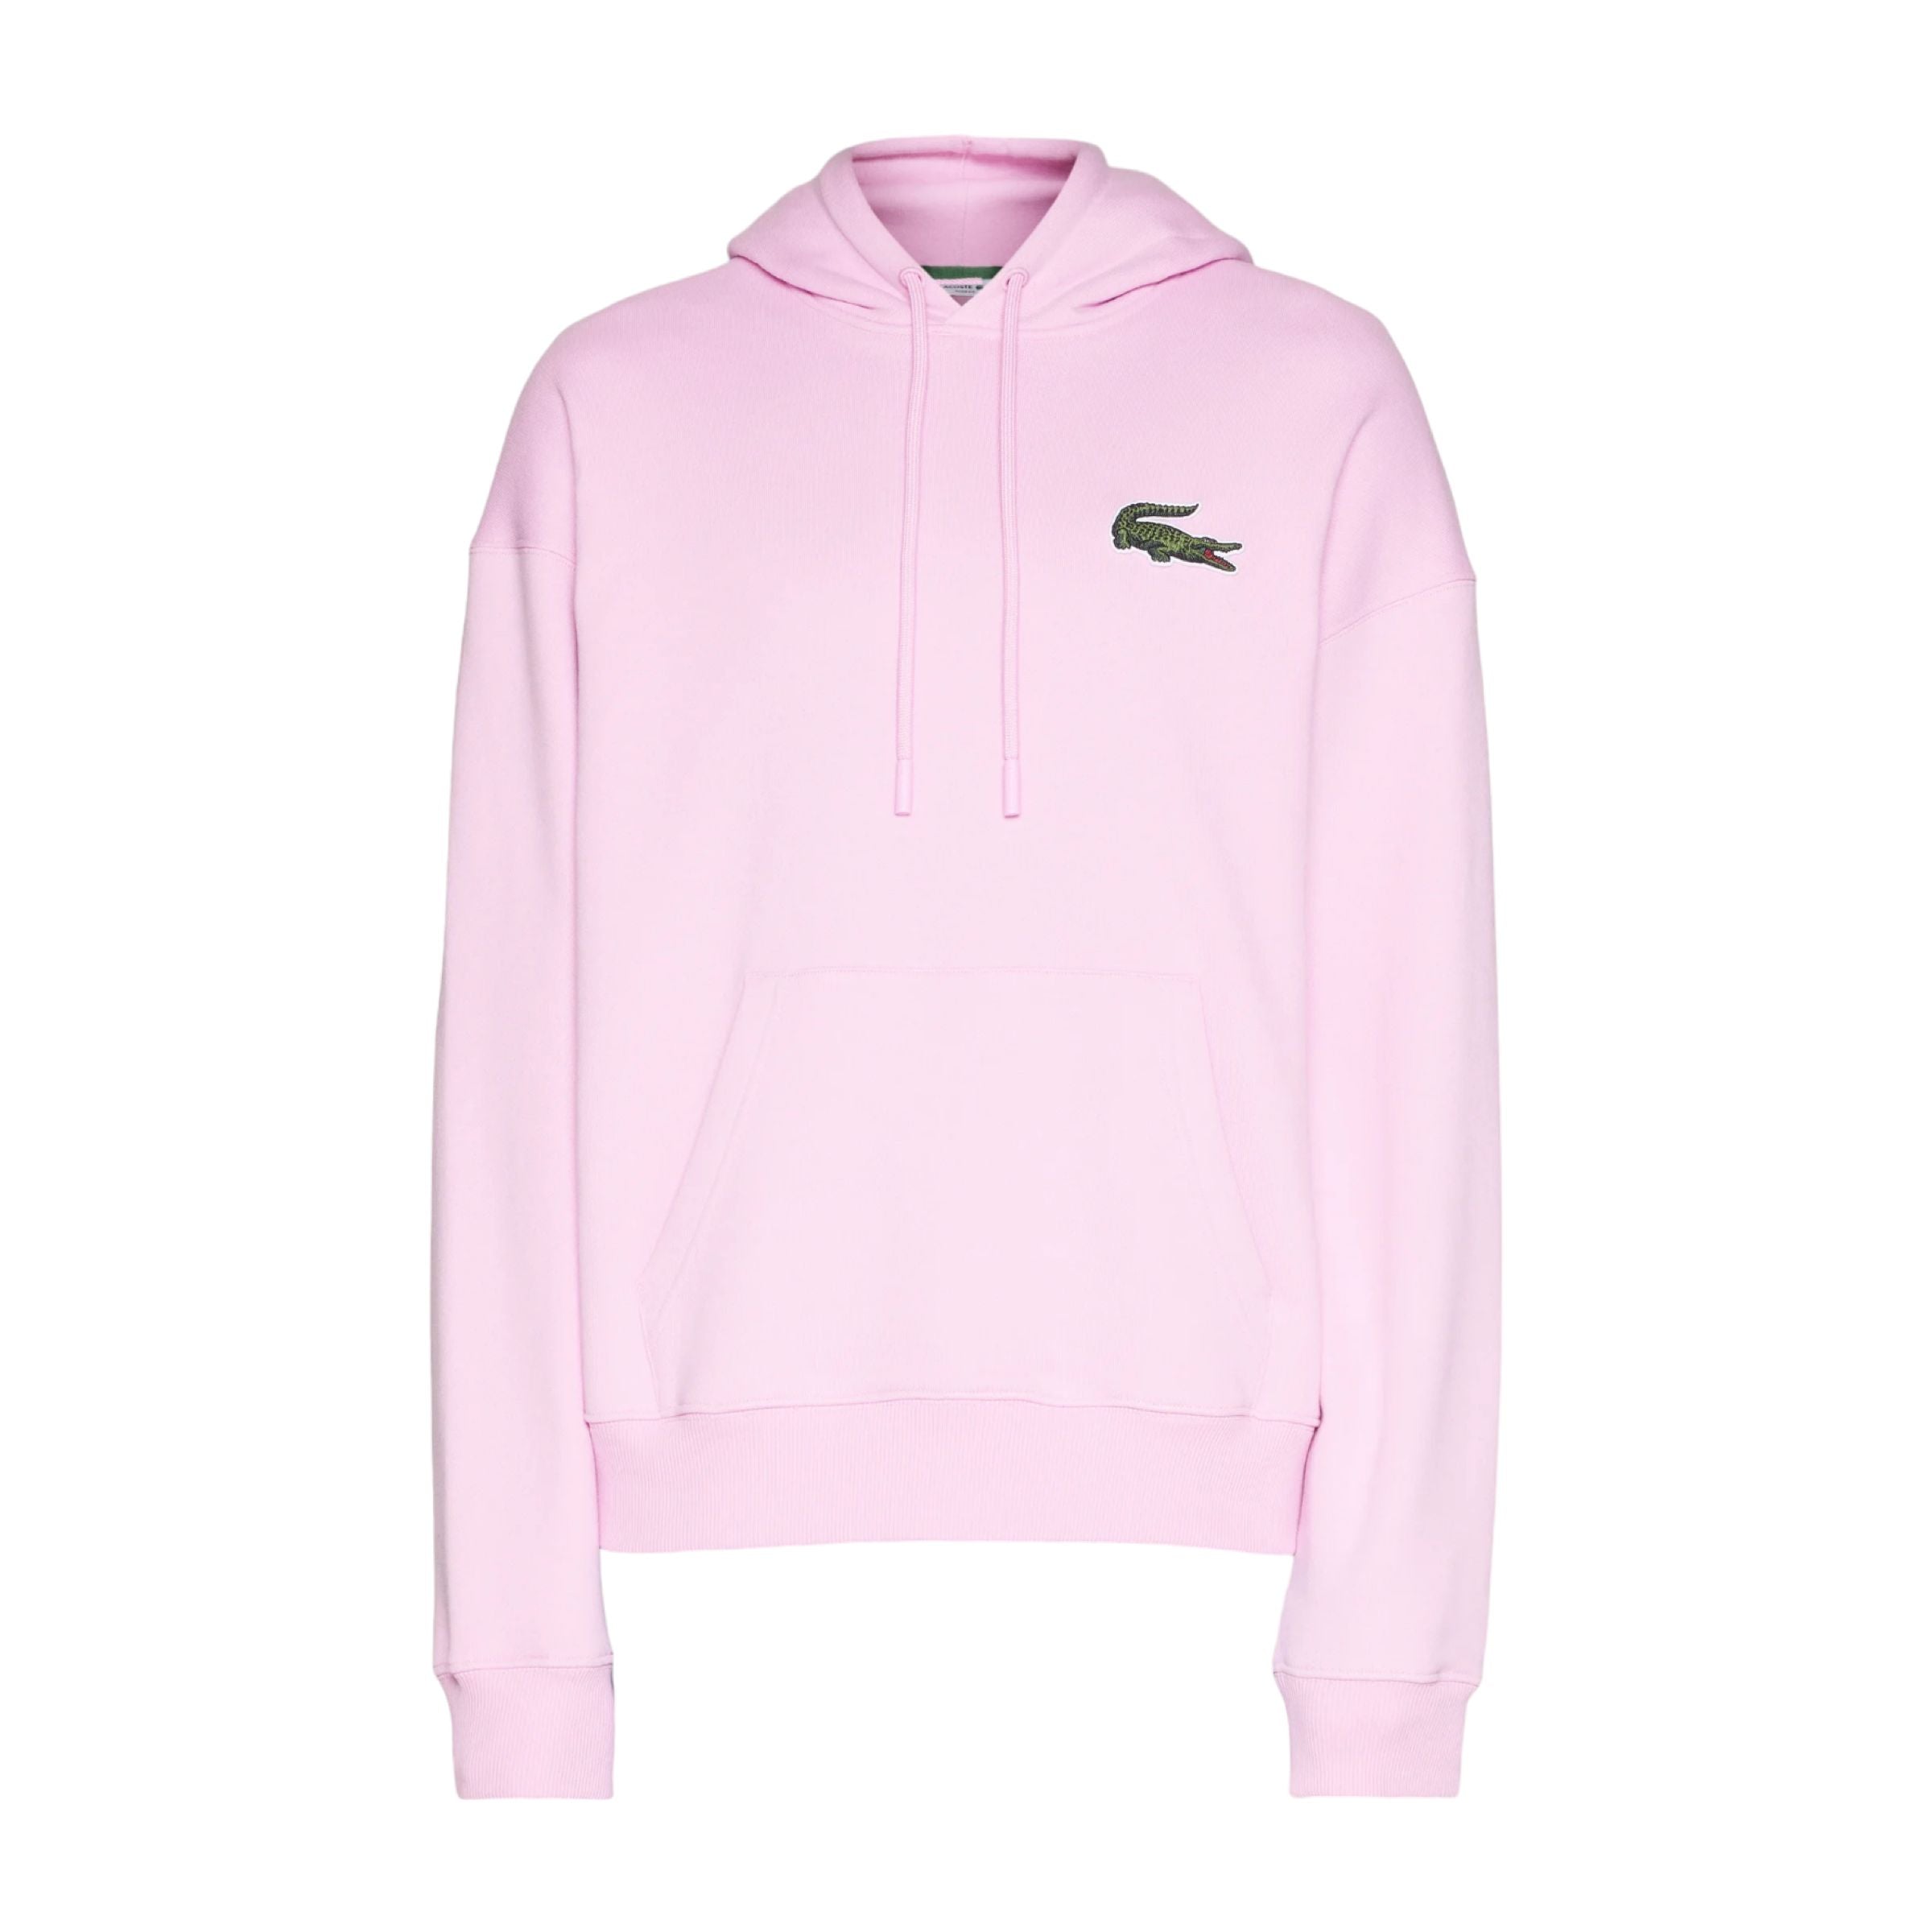 Loose Fit Hoody Sweater Pink 